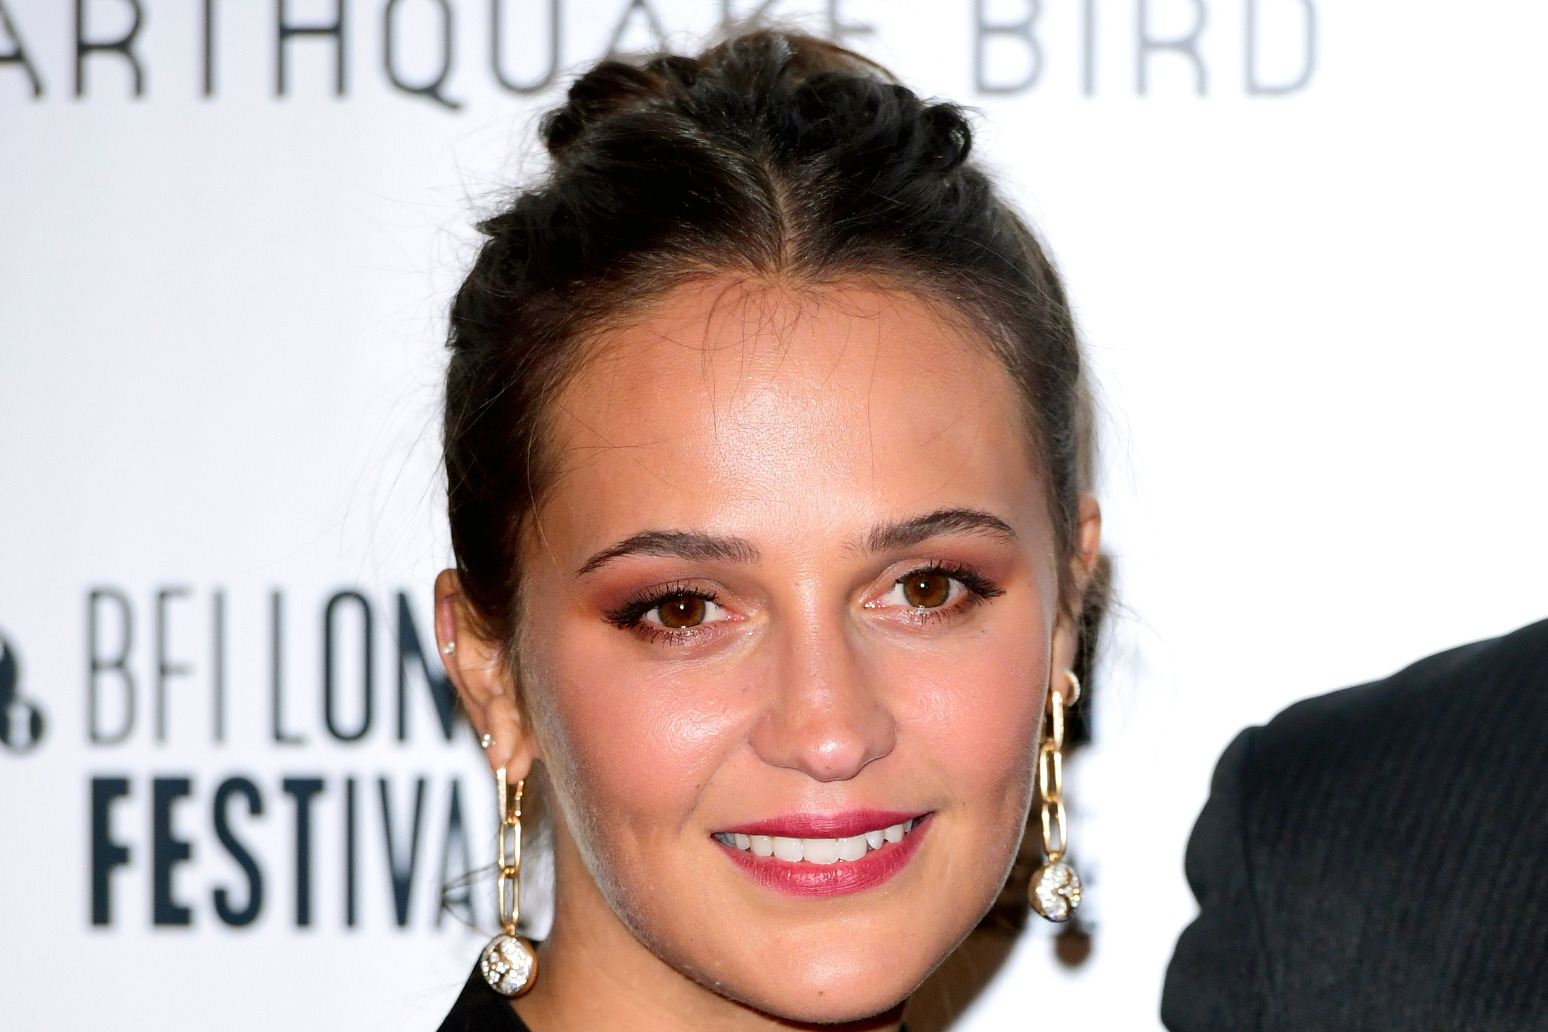 There are times where I haven’t felt protected on set, says Alicia Vikander 